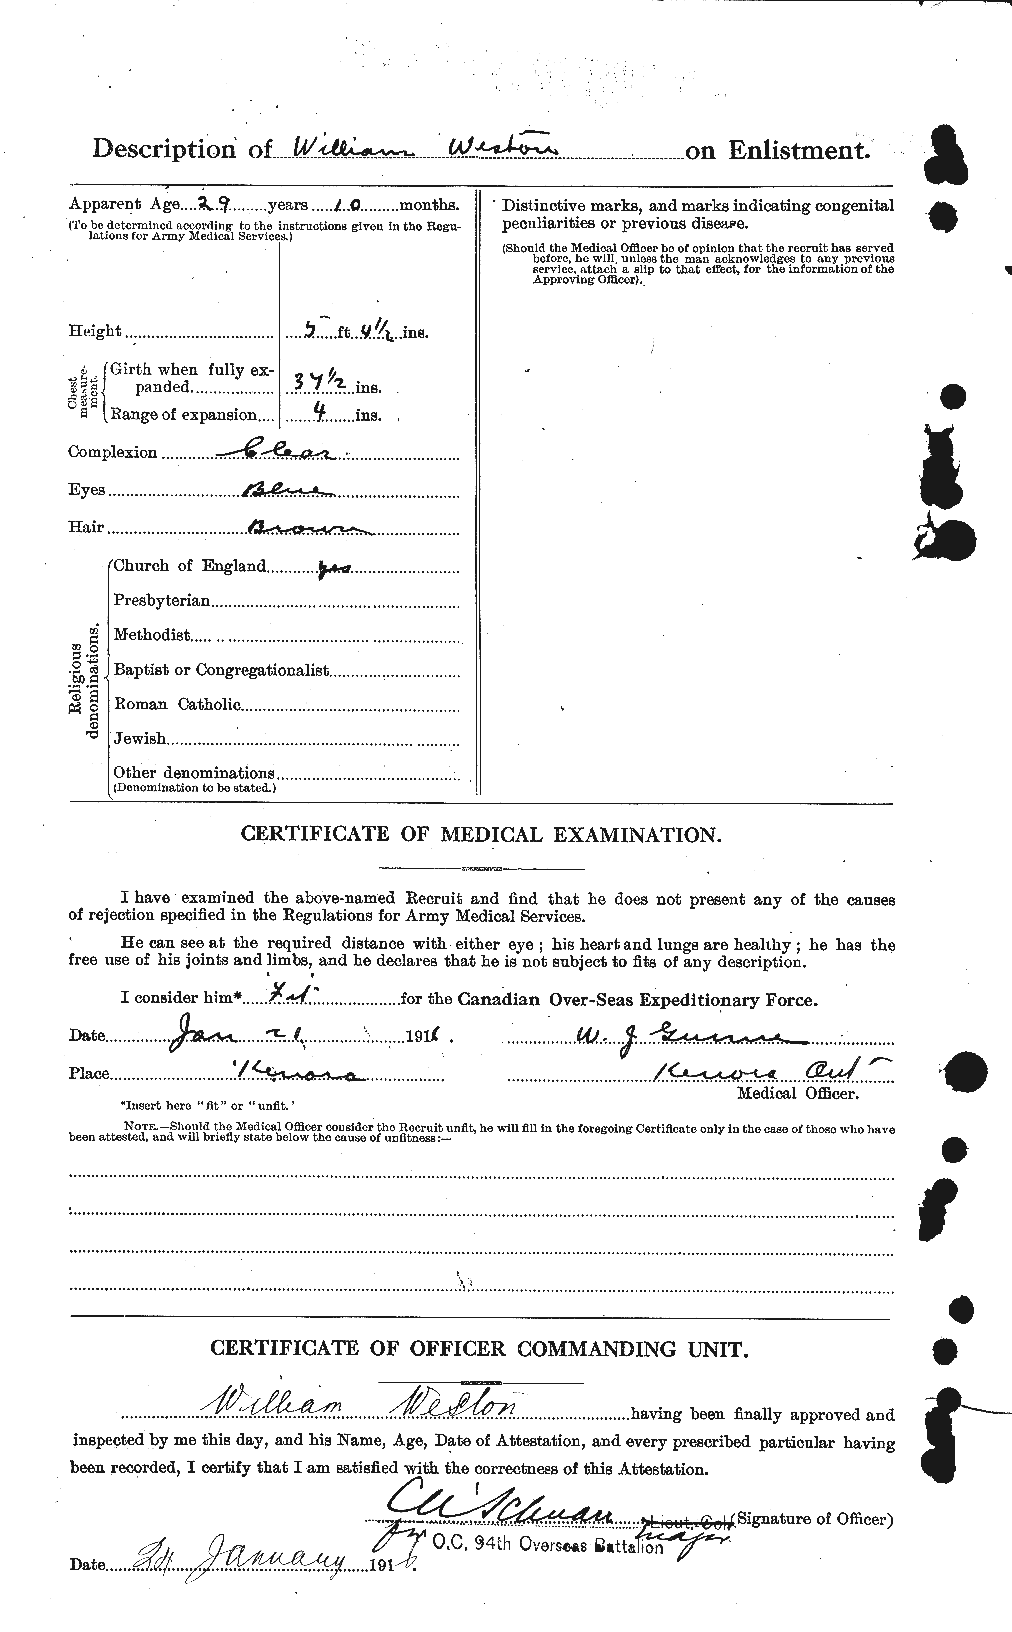 Personnel Records of the First World War - CEF 665817b